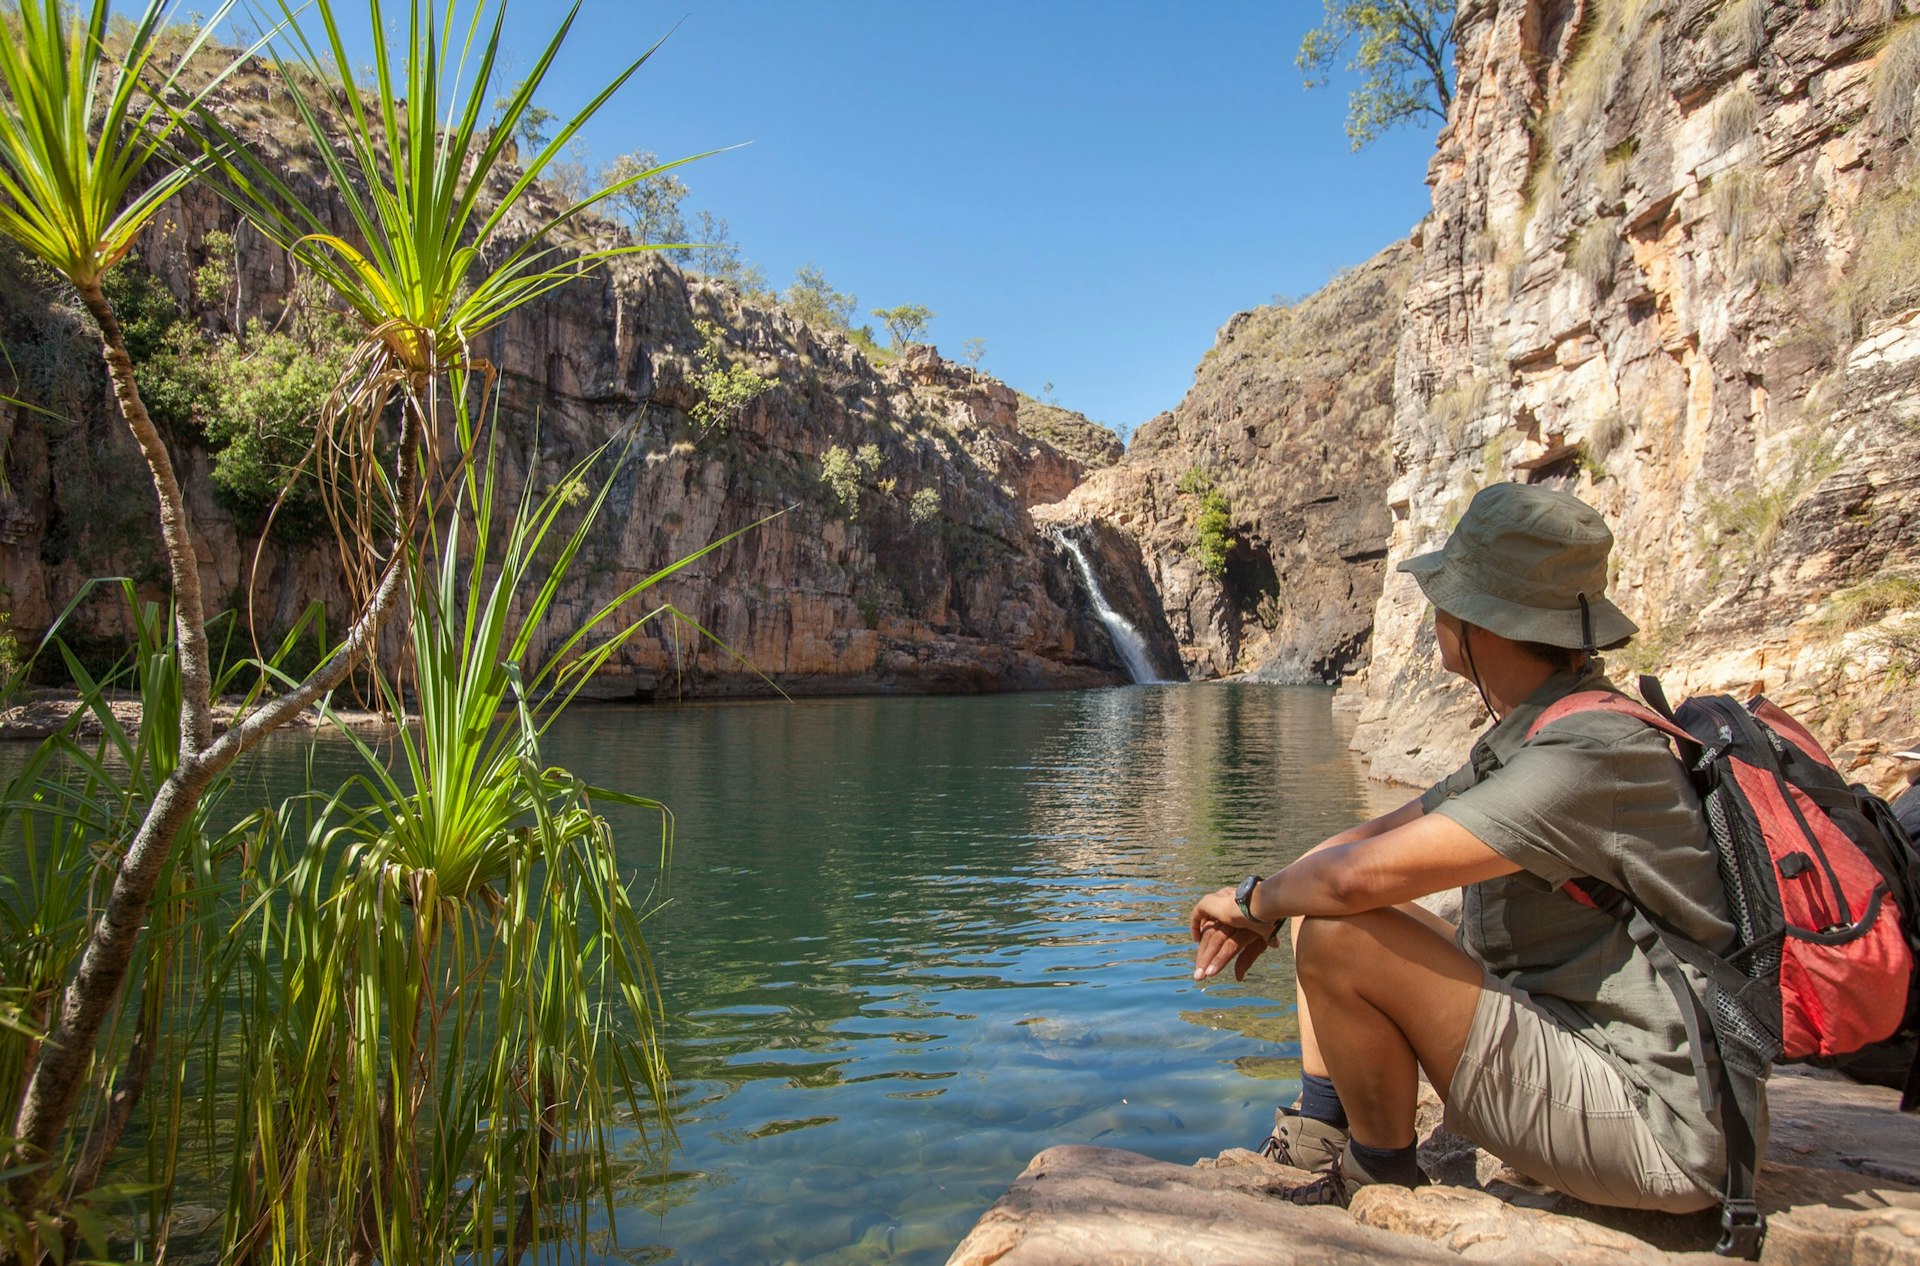 Man overlooks Rock pool at the Barramundi falls, Kakadu National Park, one of the crocodile-free lakes in this area